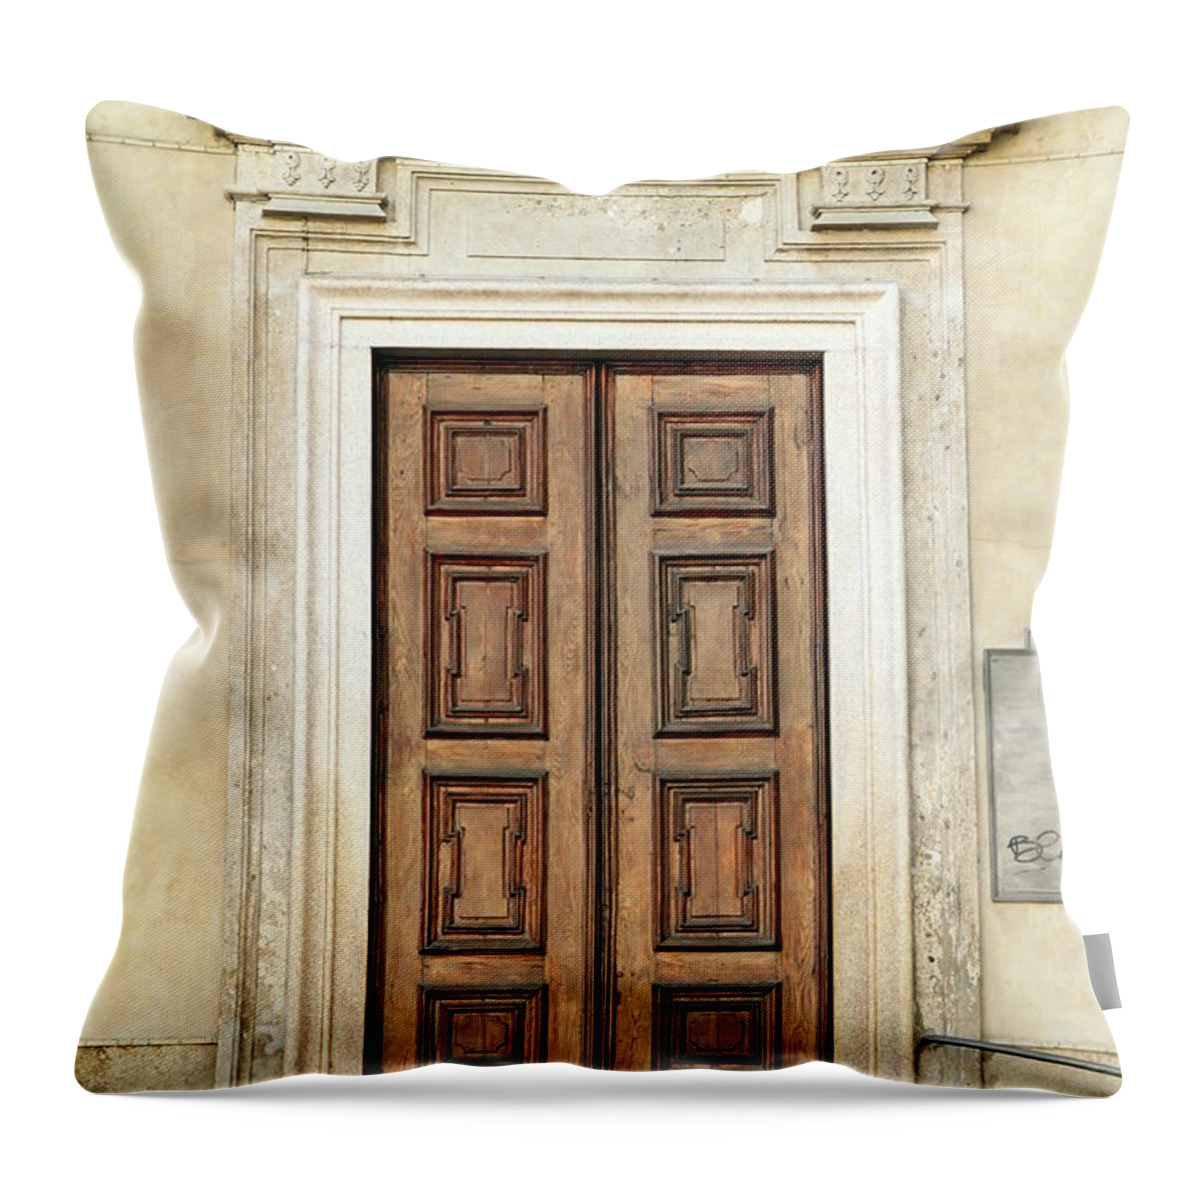 Church Throw Pillow featuring the photograph Church Door by Valentino Visentini